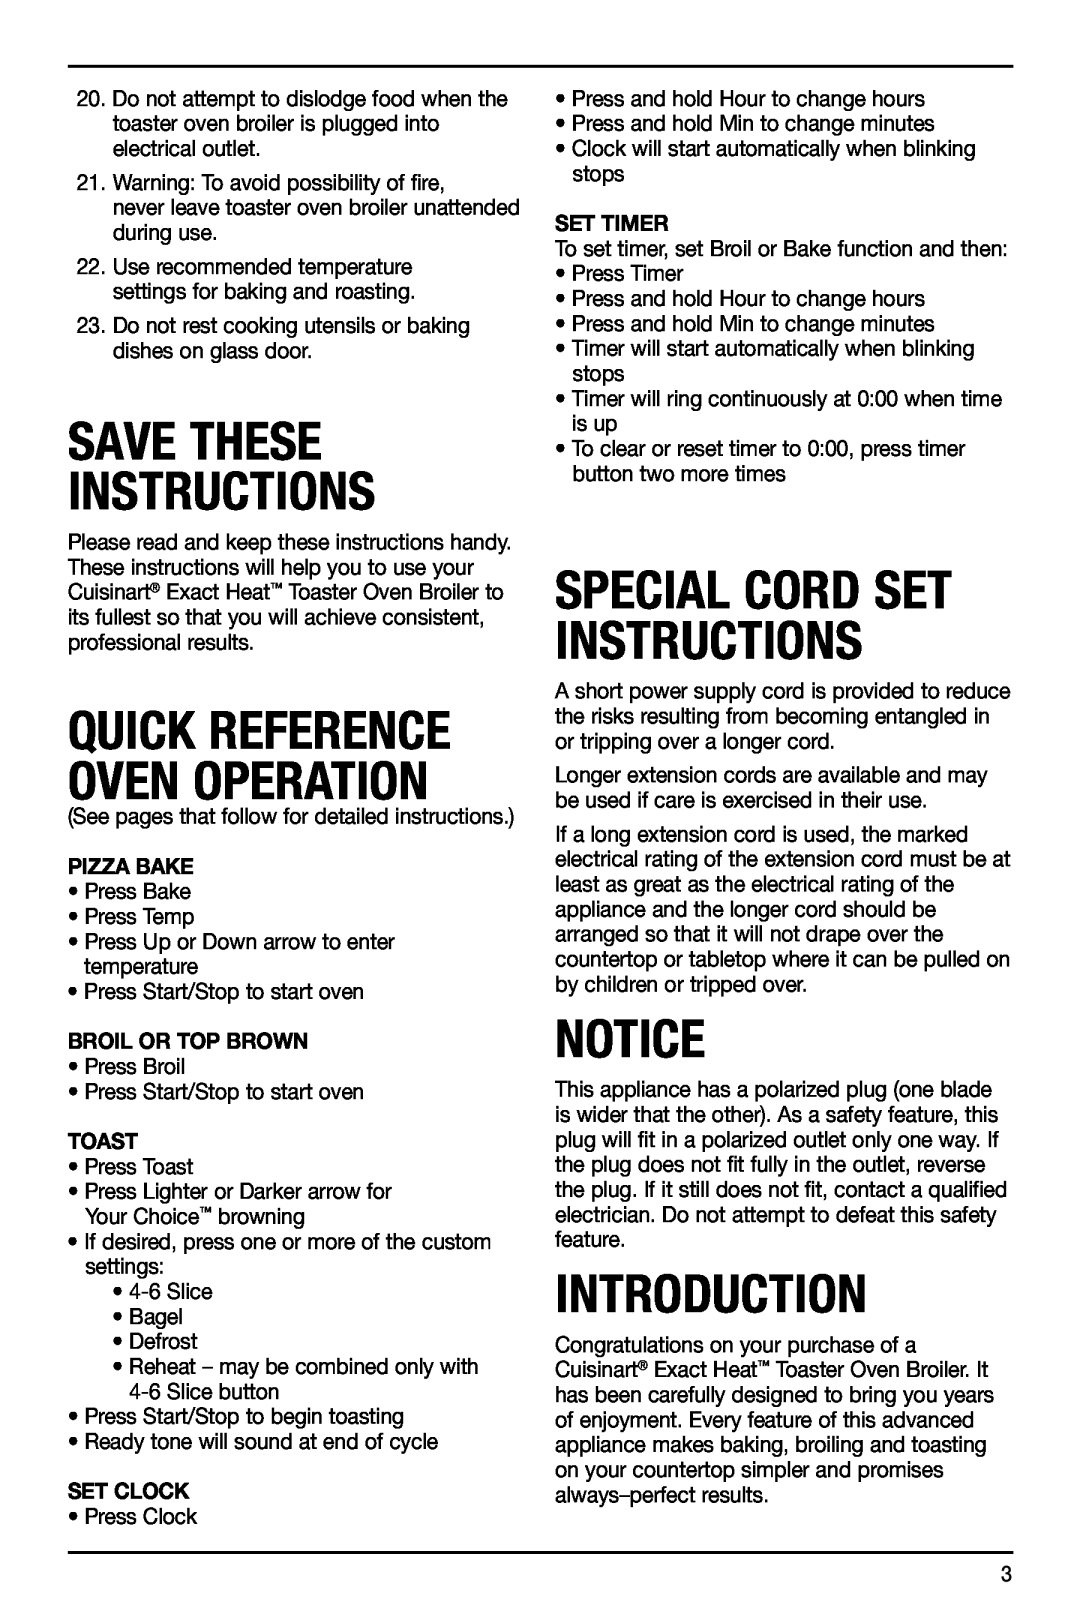 Cuisinart TOB-155 Save These Instructions, Introduction, Special Cord Set Instructions, Quick Reference Oven Operation 